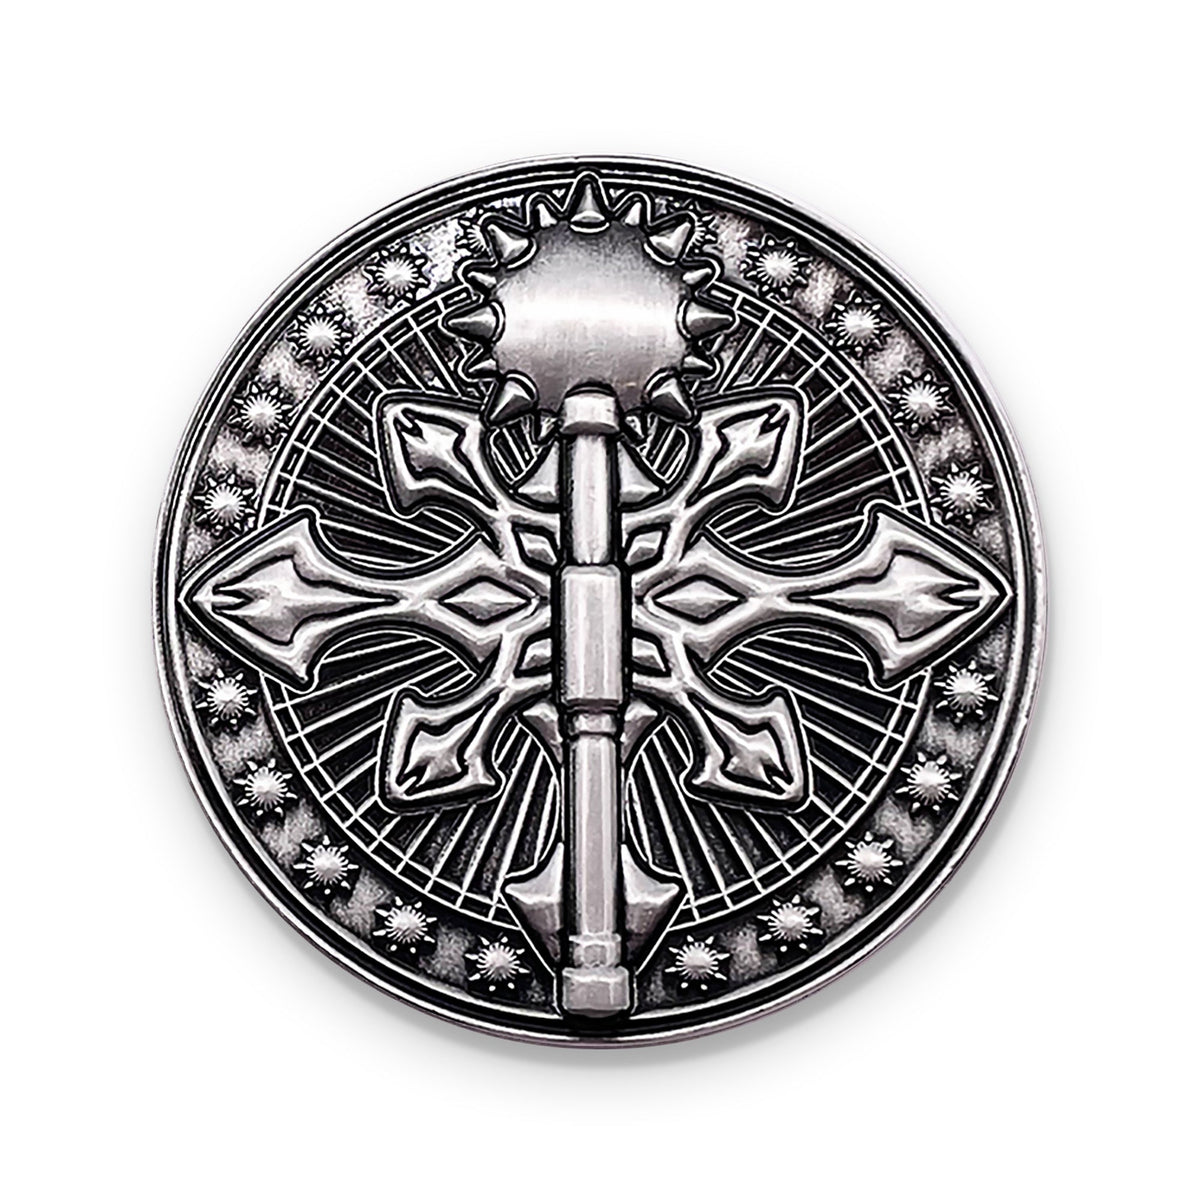 Cleric - Single 45mm Profession Coin - NOR 03424